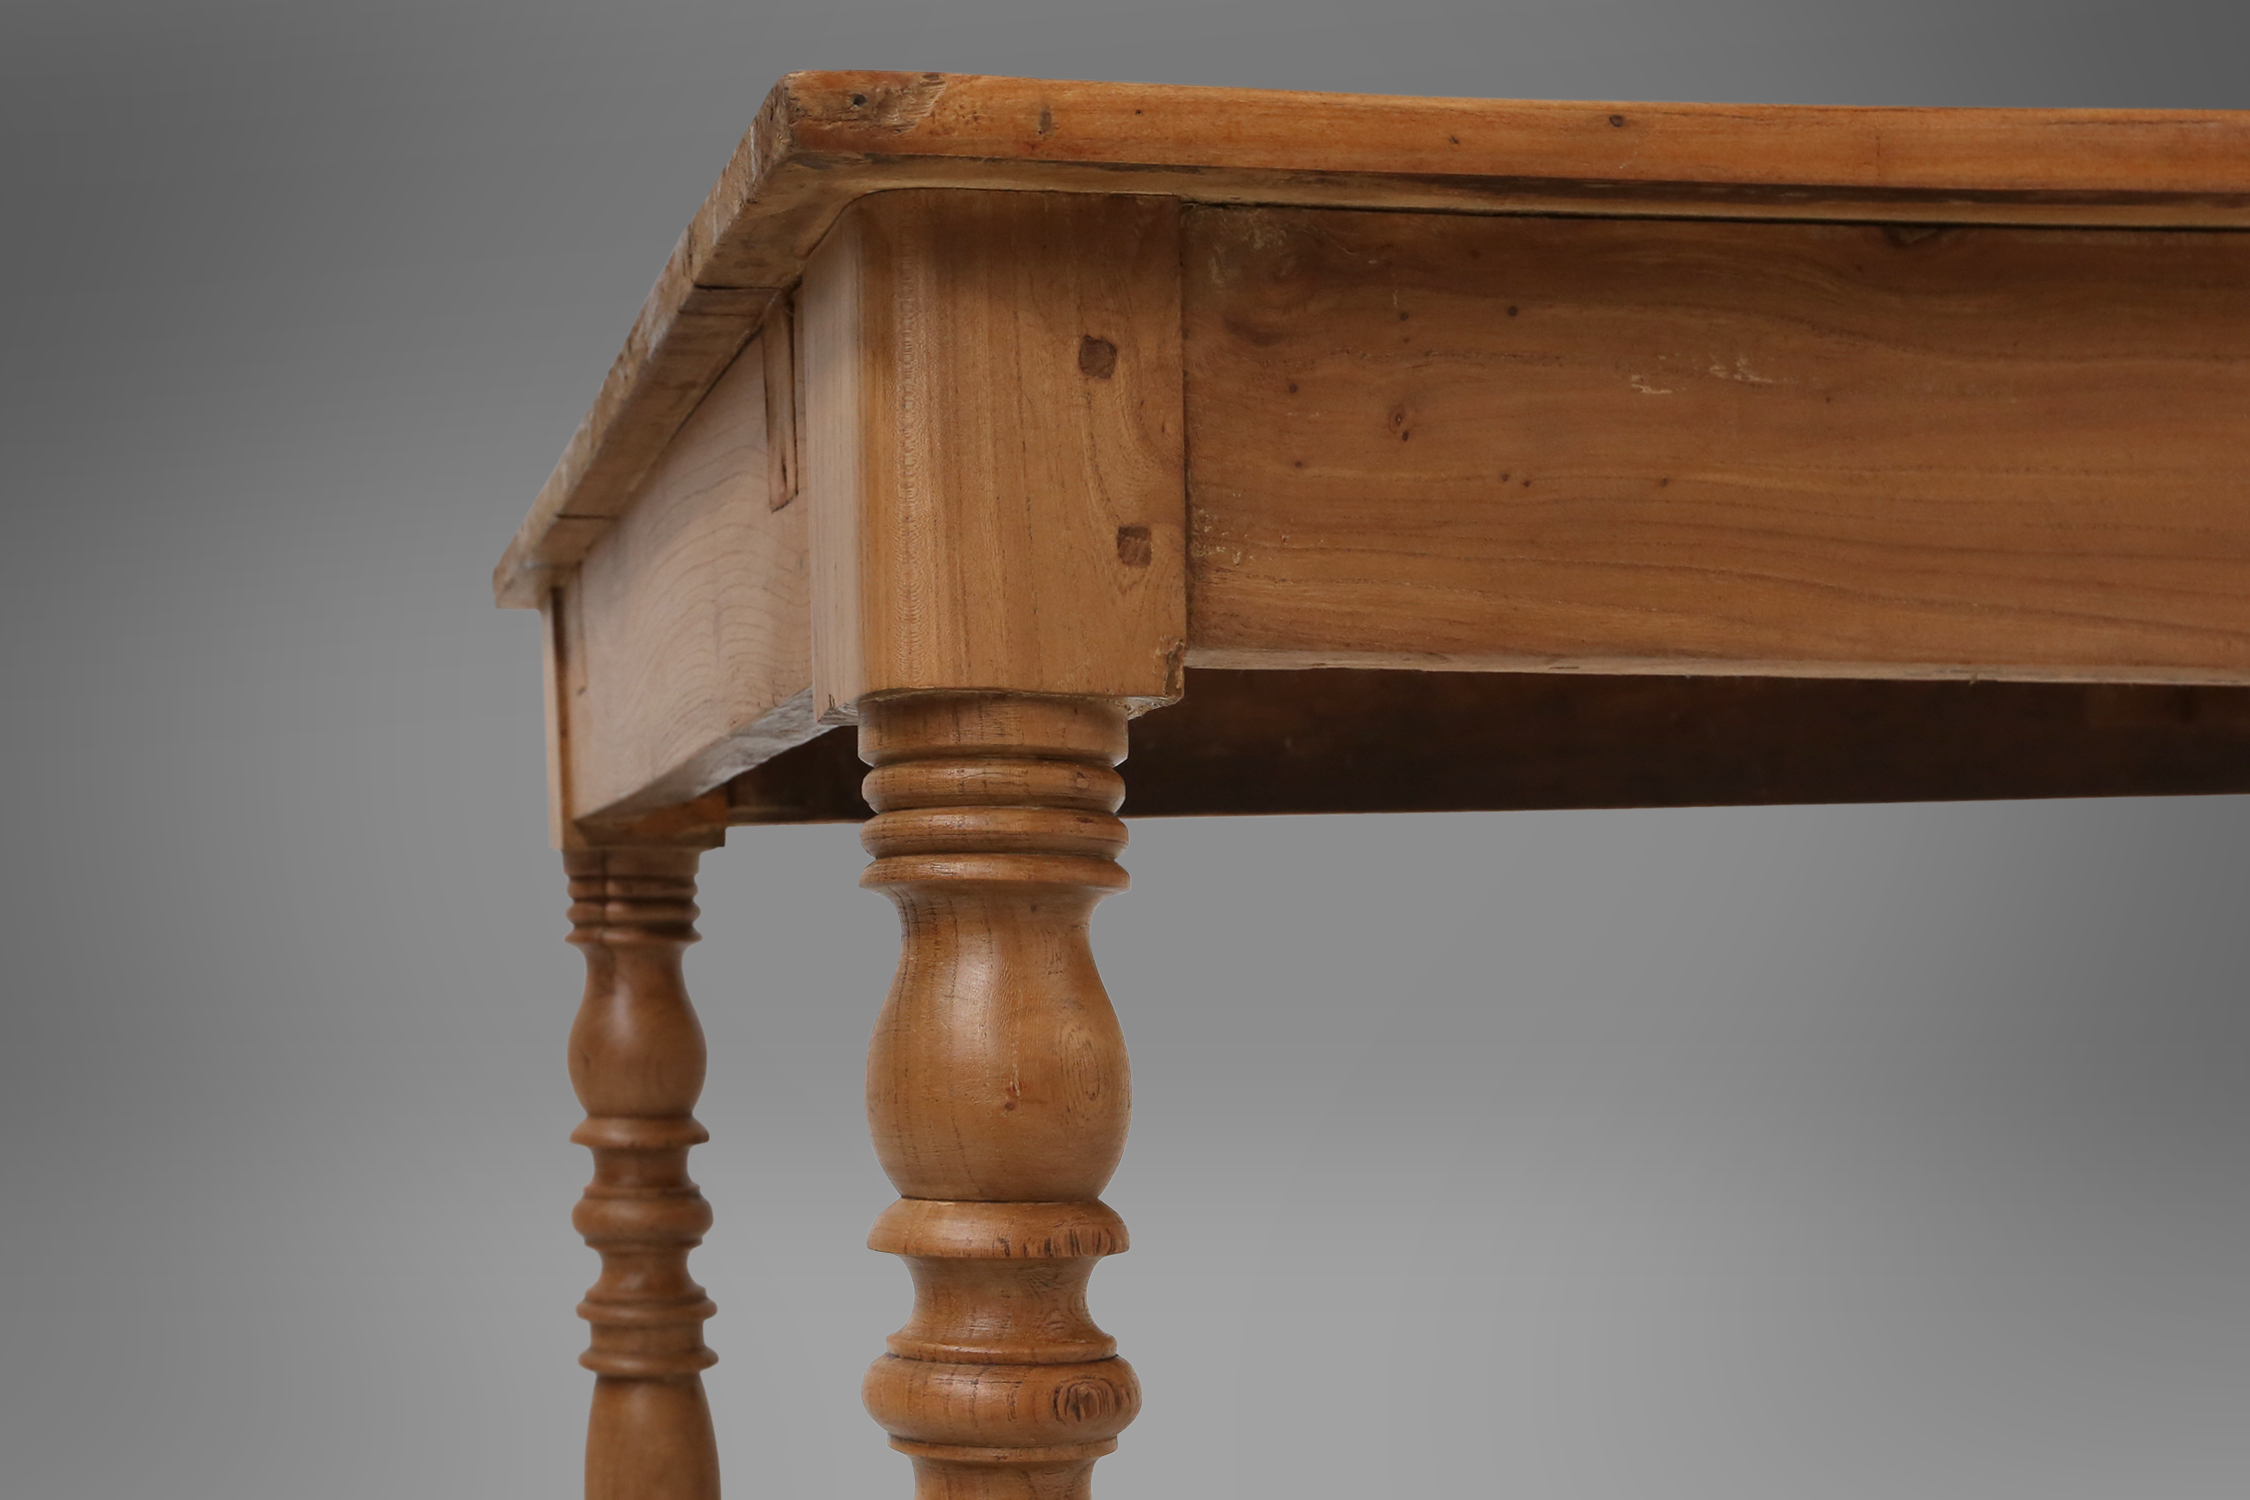 Large pine wood farm table with drawer and turned legs, France, 1850sthumbnail